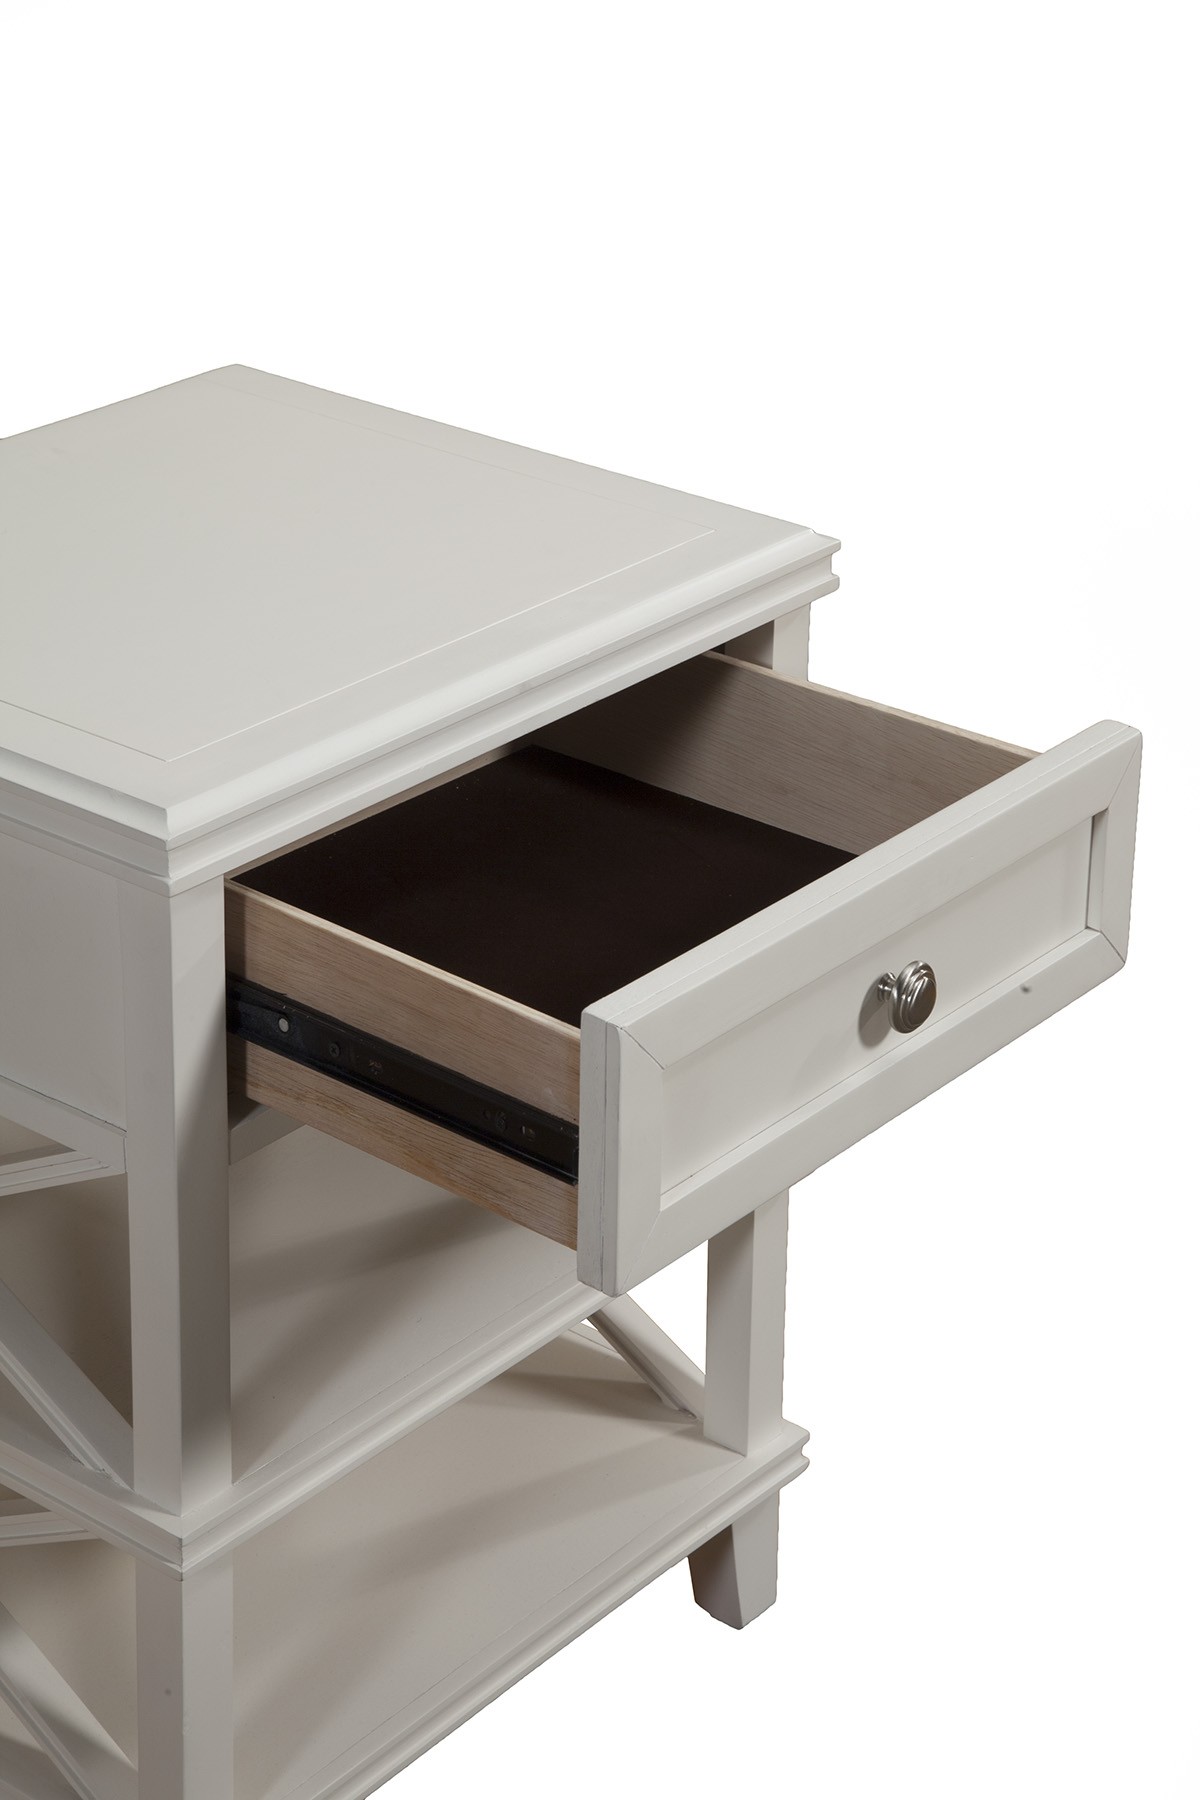 White 1 Drawer with Shelves Nightstand